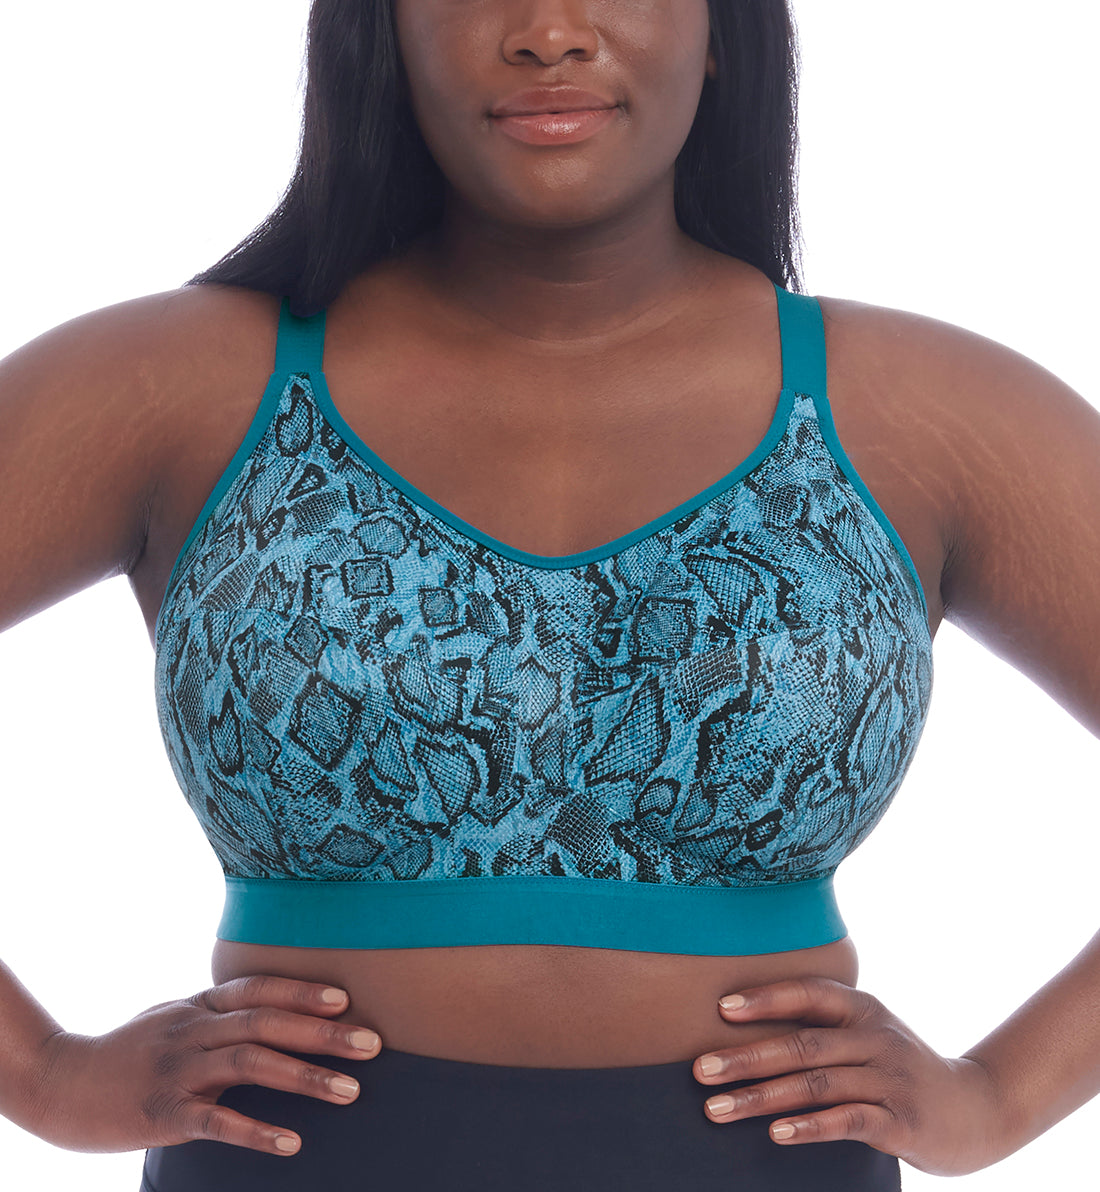 Goddess Non Wire Side Support Sports Bra (6912),34I,Teal - Teal,34I